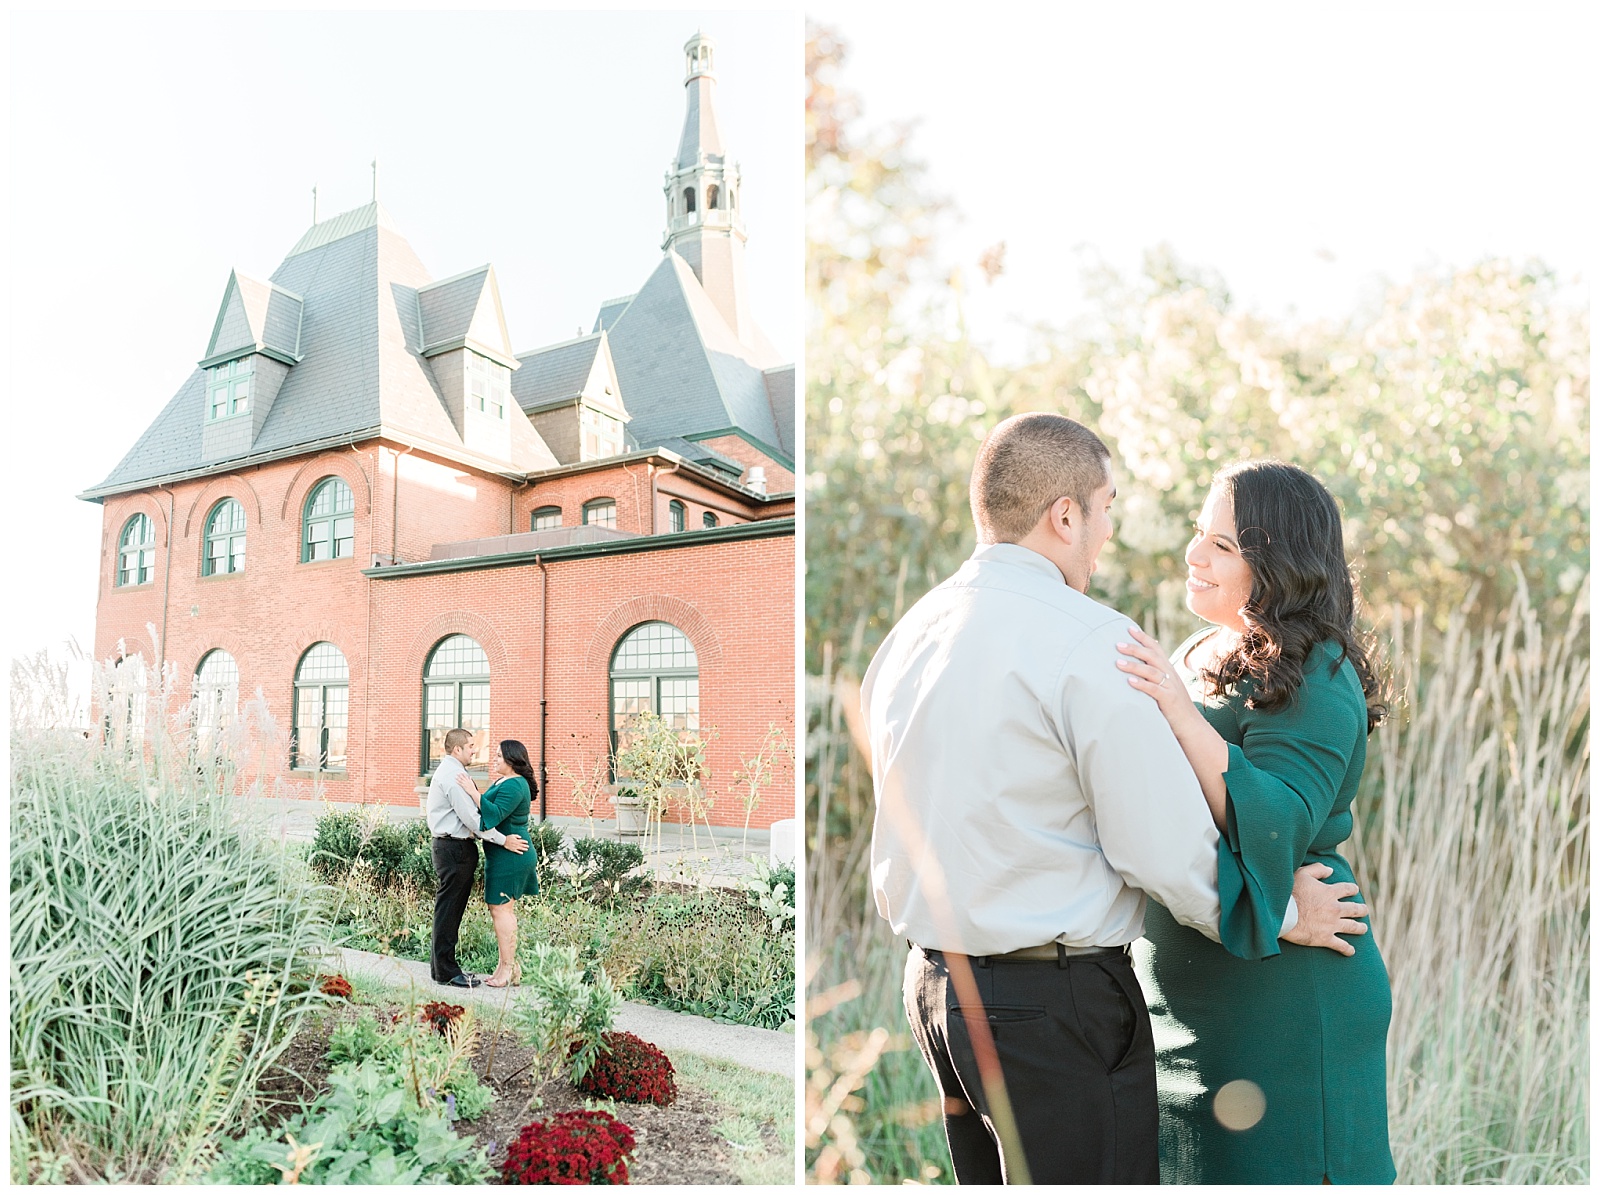 Clock,Engaged,Engagement Session,Field,Garden,Jersey City,Liberty State Park,NJ,Nature,Train Station,Wedding Photographer,